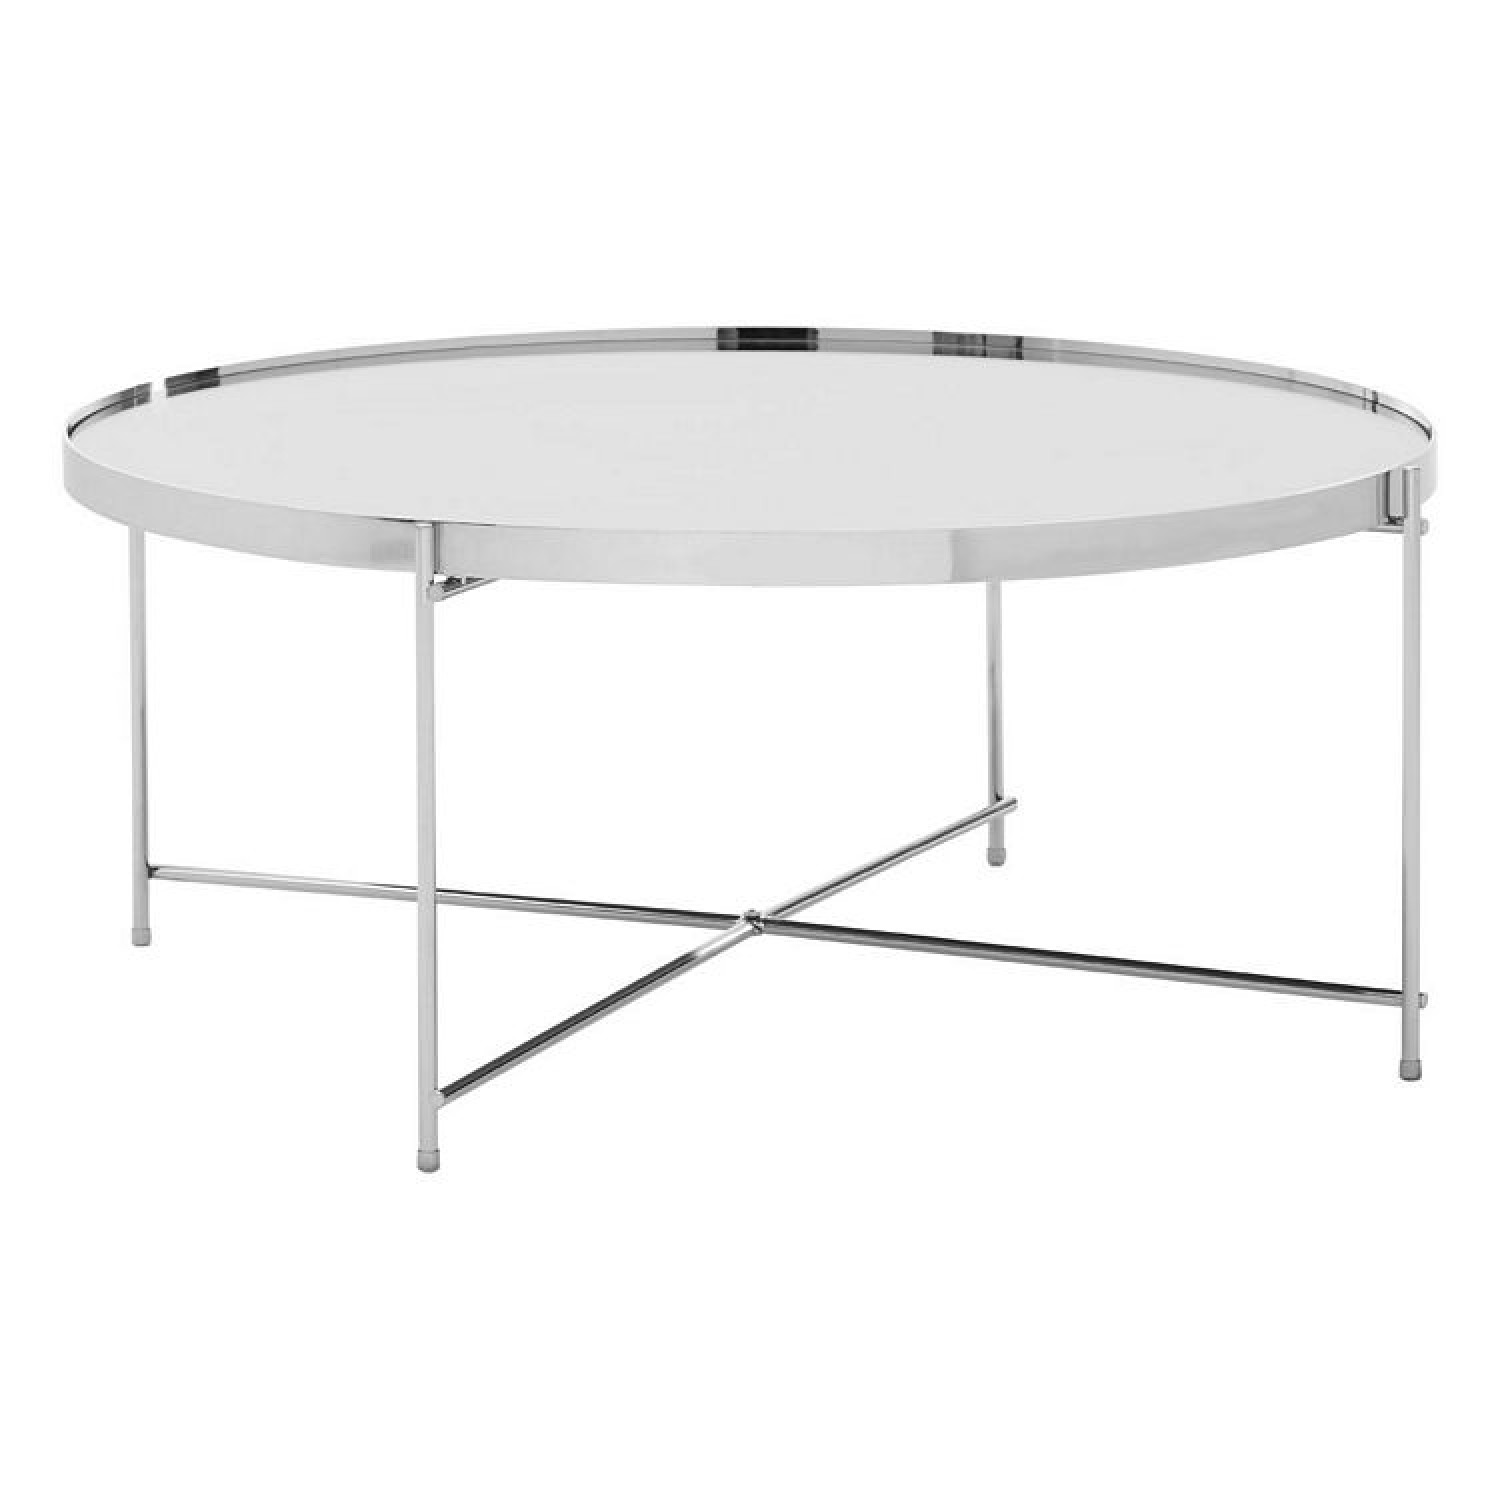 Allure Mirrored Glass And Chrome Metal Round Coffee Table Oak Furniture House